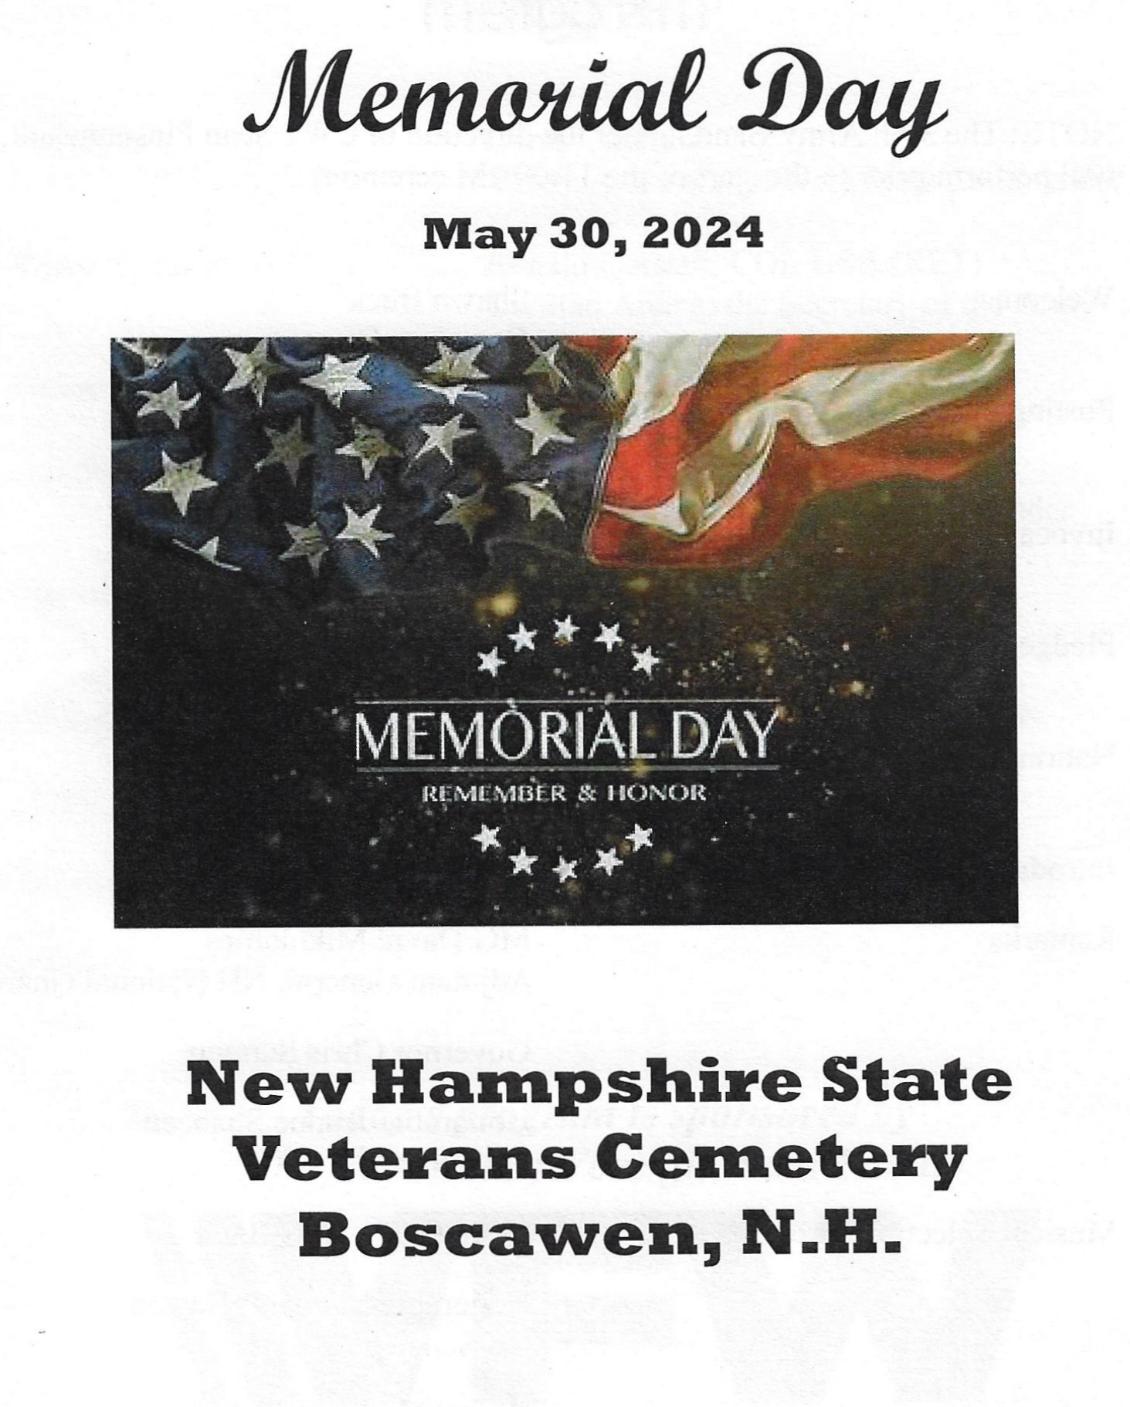 Memorial Day Observation at the New Hampshire State Veterans Cemetery May 30, 2024